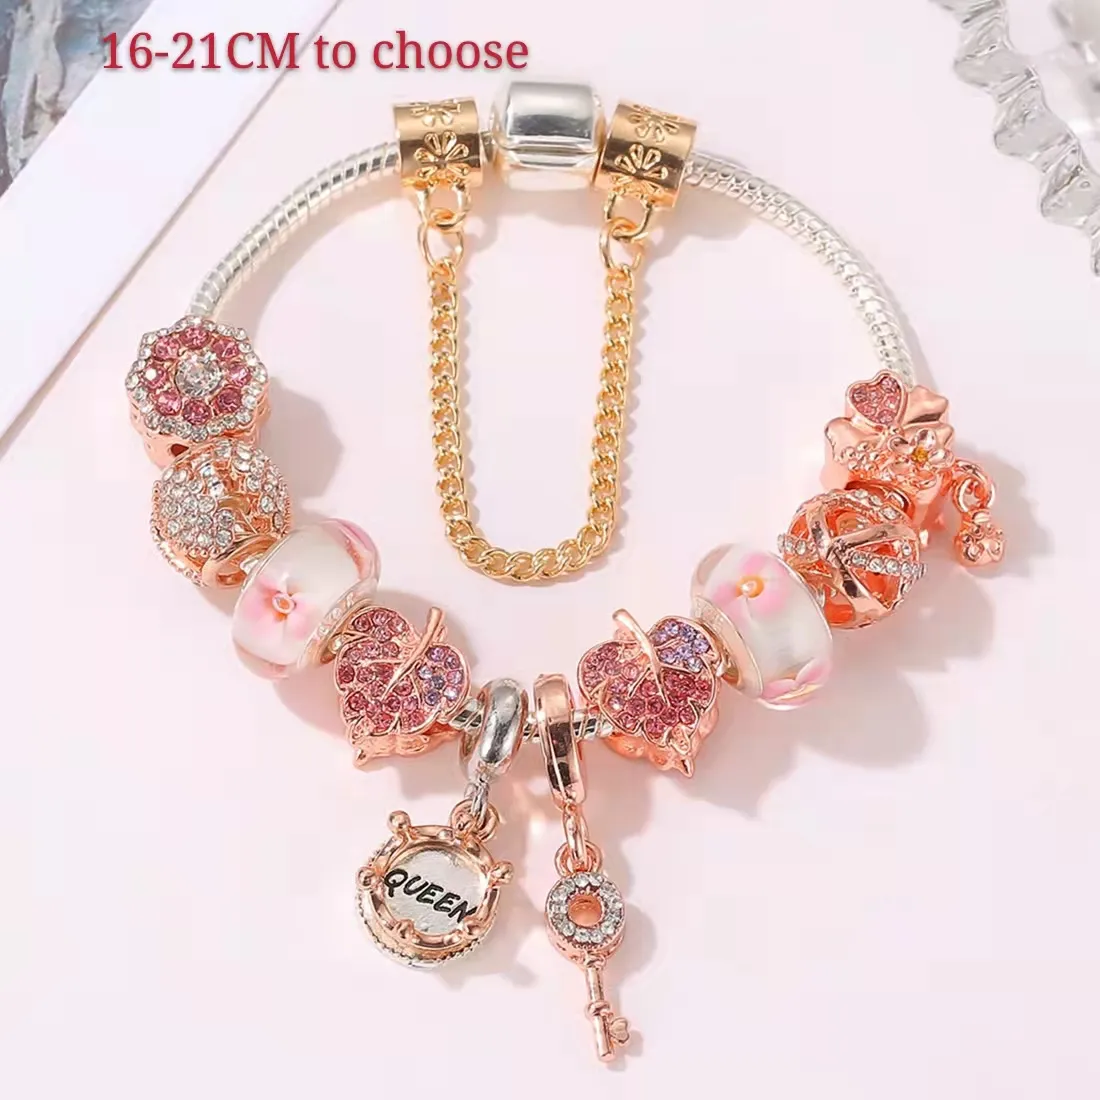 16-21CM Rose gold charms bracelets pink flower charm beads queen pendant fit Valentine's Jewelry DIY Bead Accessories for sil230e